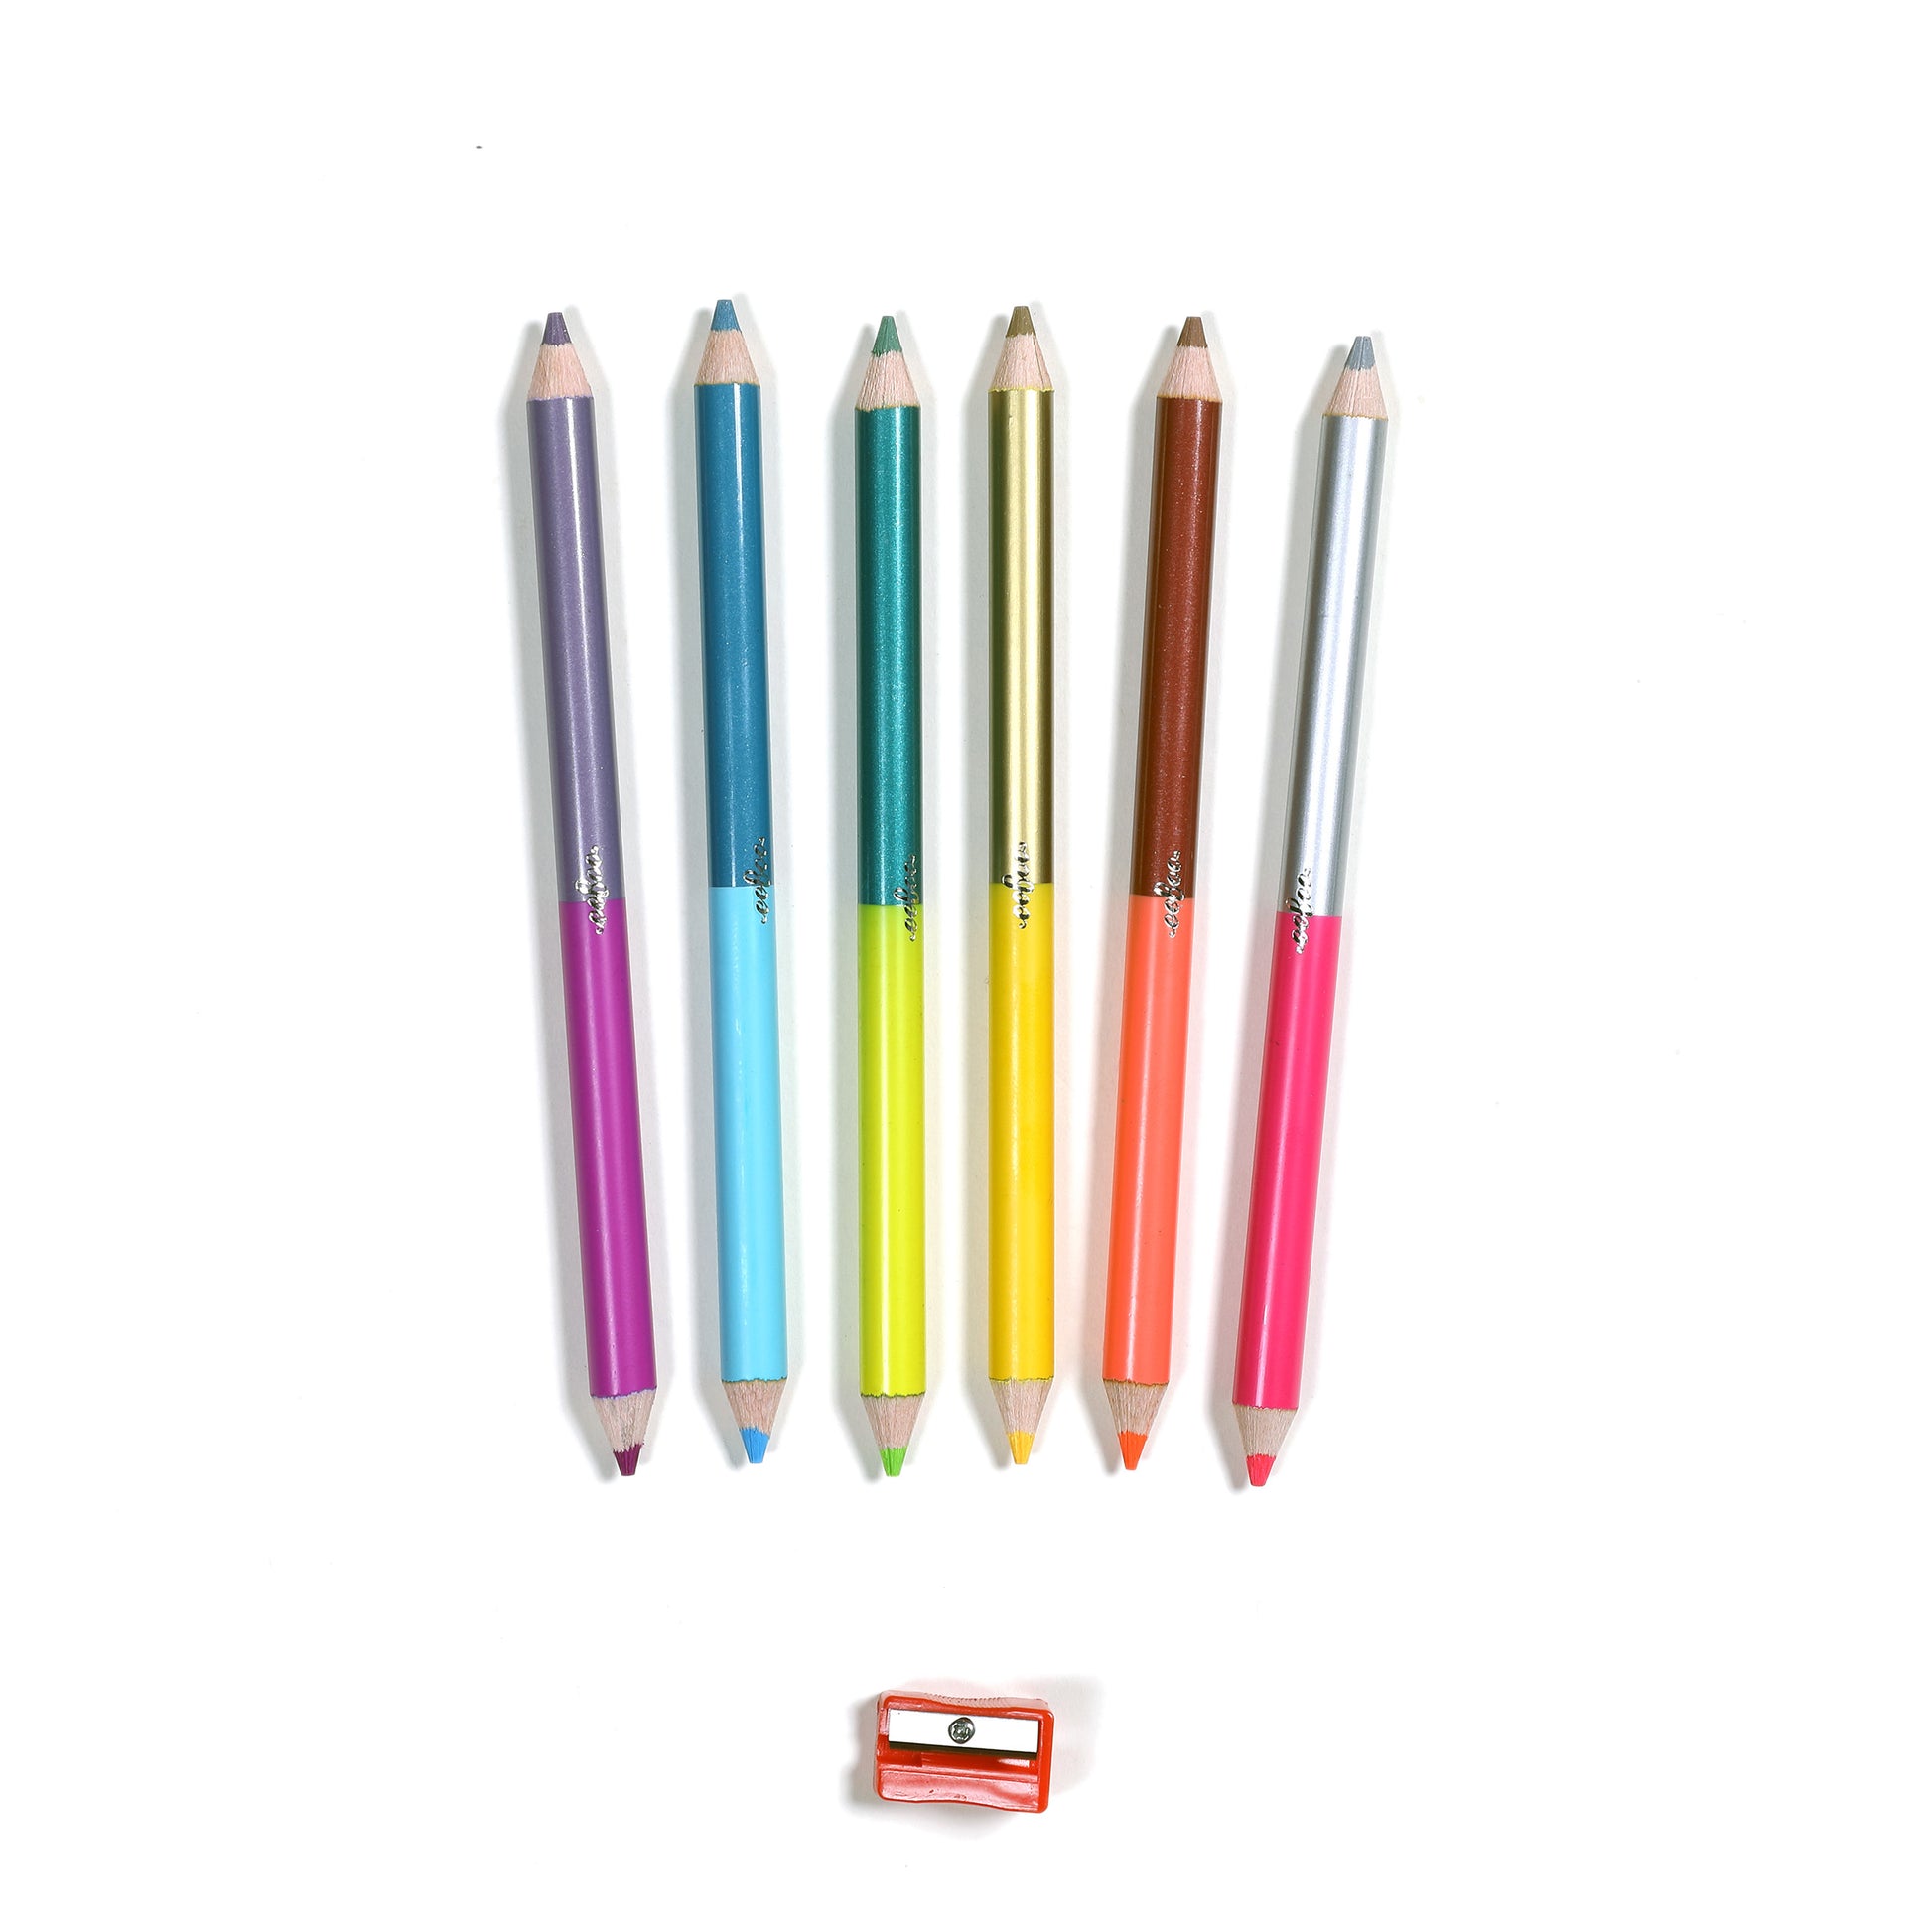 Robot Metallic Pencils - A2Z Science & Learning Toy Store